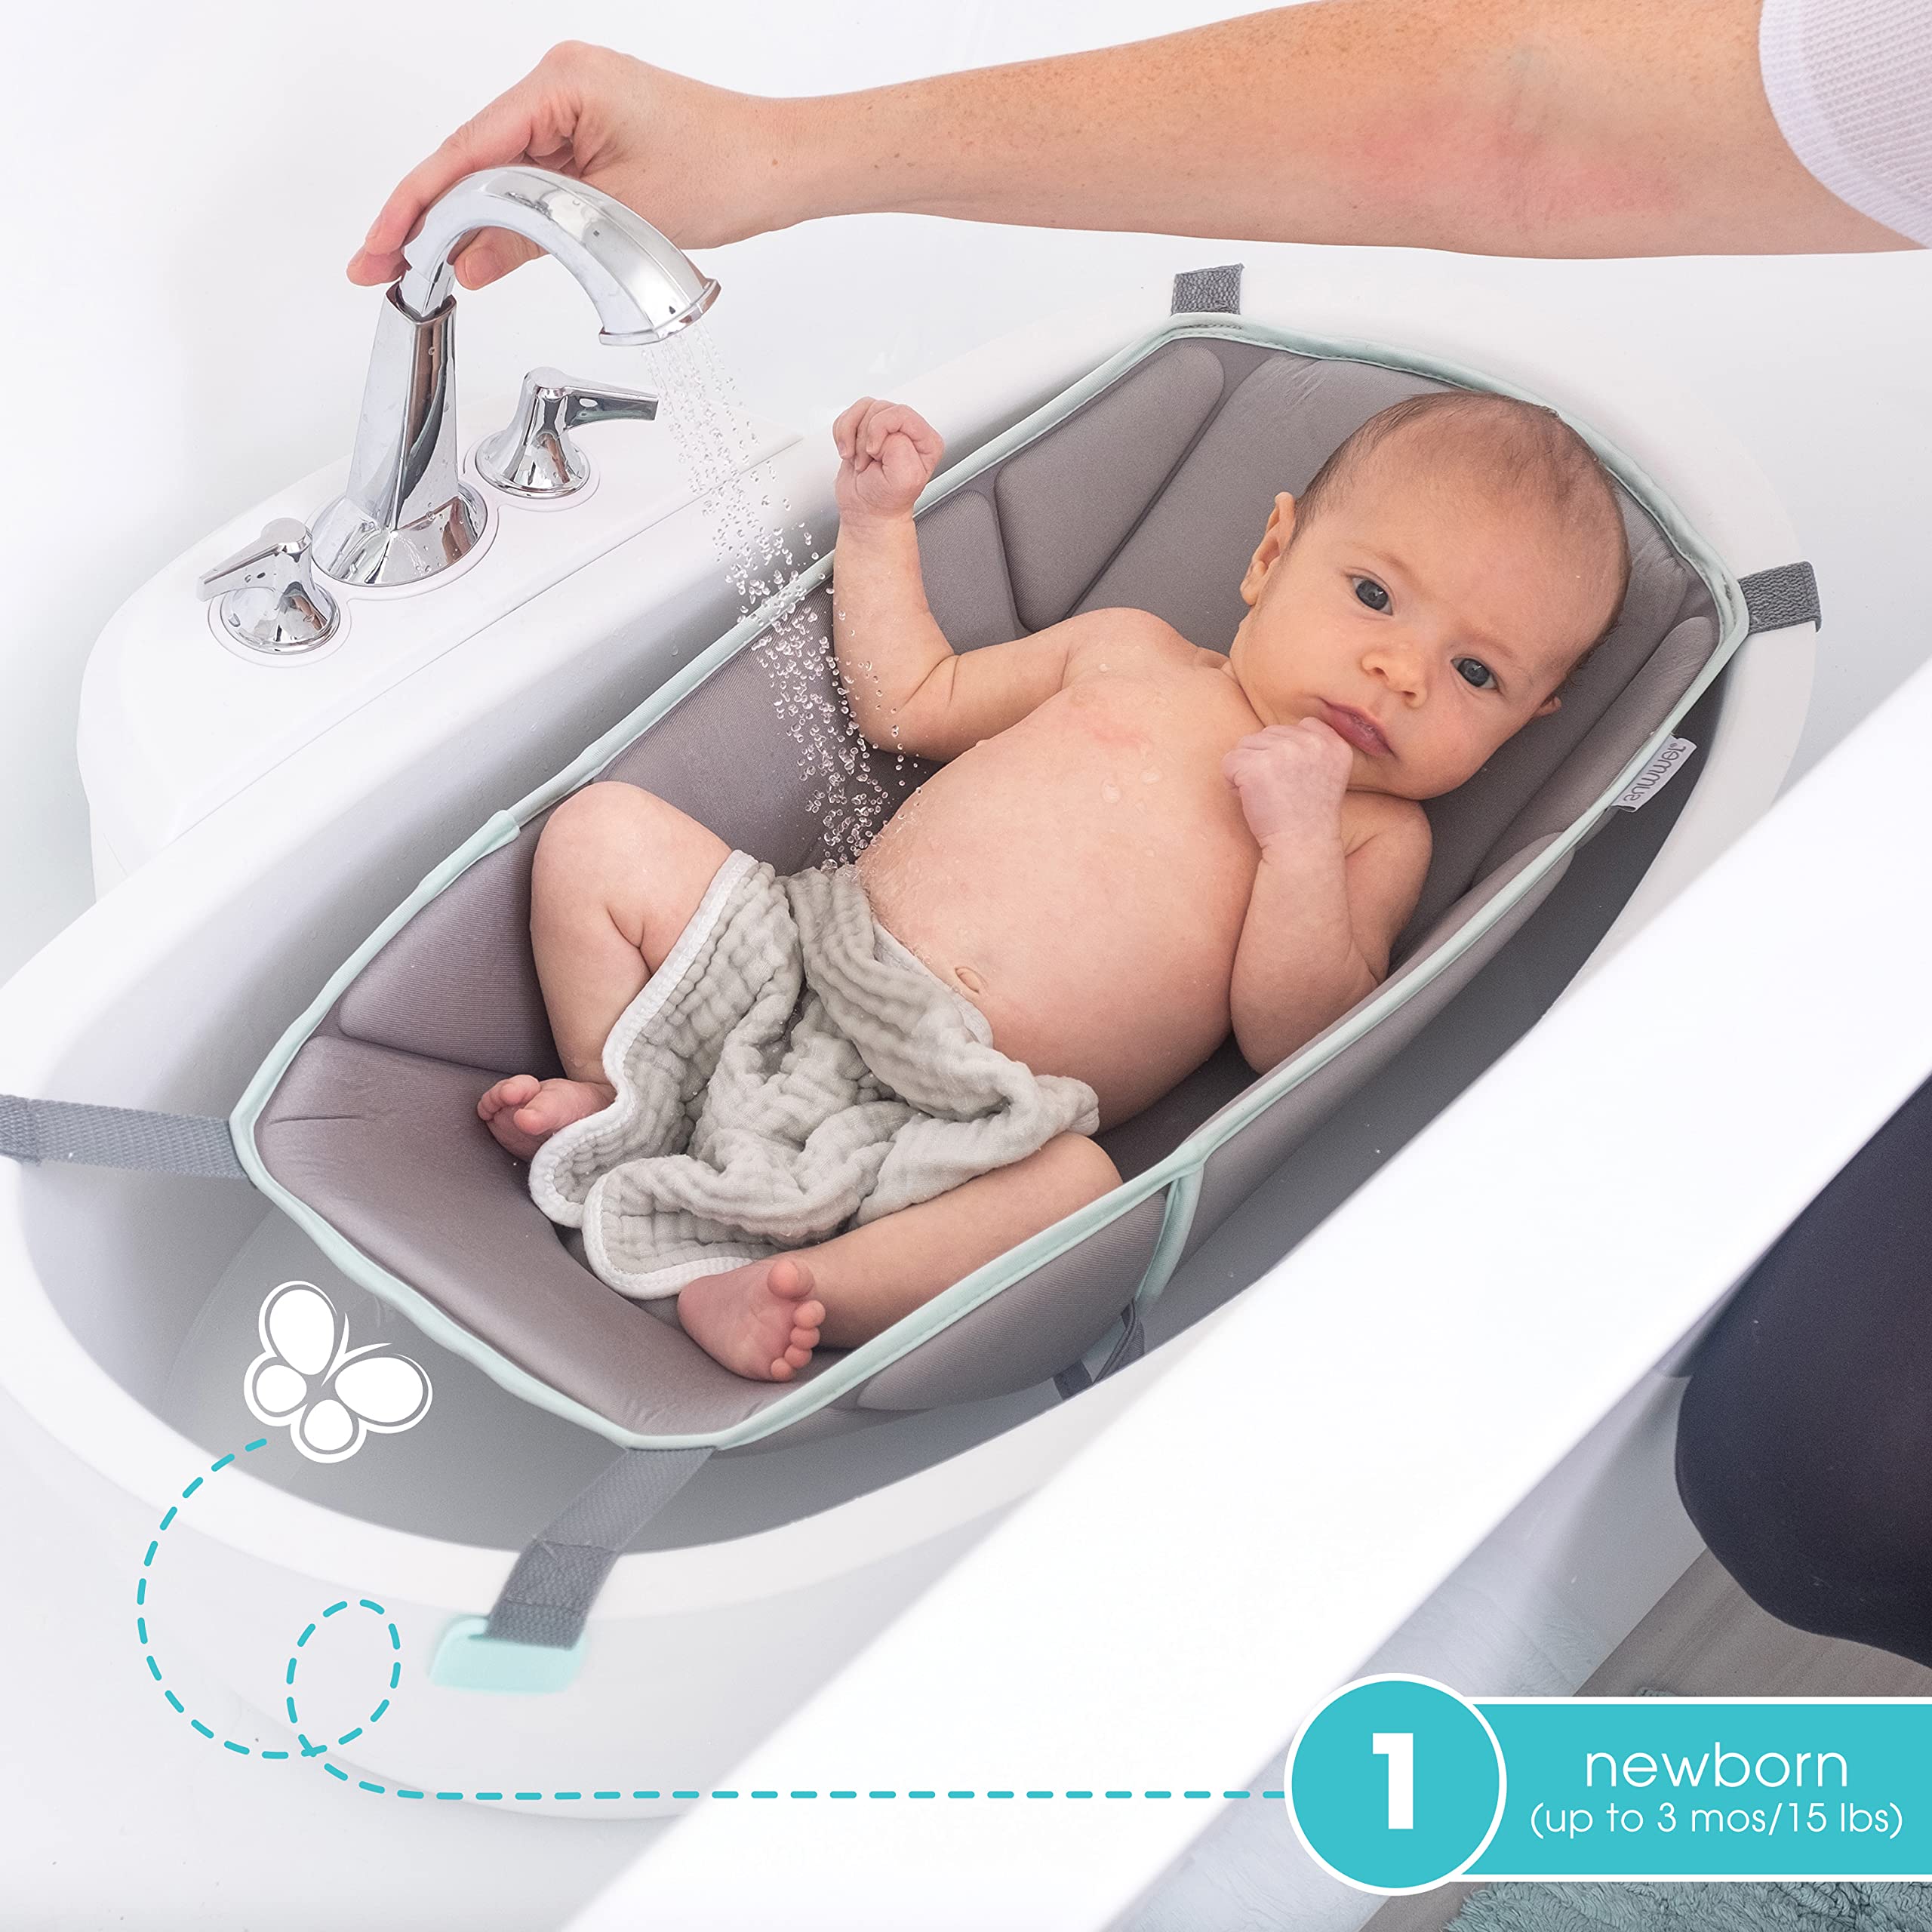 Summer® My Size™ Tub 4-in-1 Modern Bathing System - for Ages 0-24 Months – Baby Bathtub Includes Soft Support, Pull-Down Sprayer and Removable Water Tank, Rinse and Pour Cups, and Drain Plug